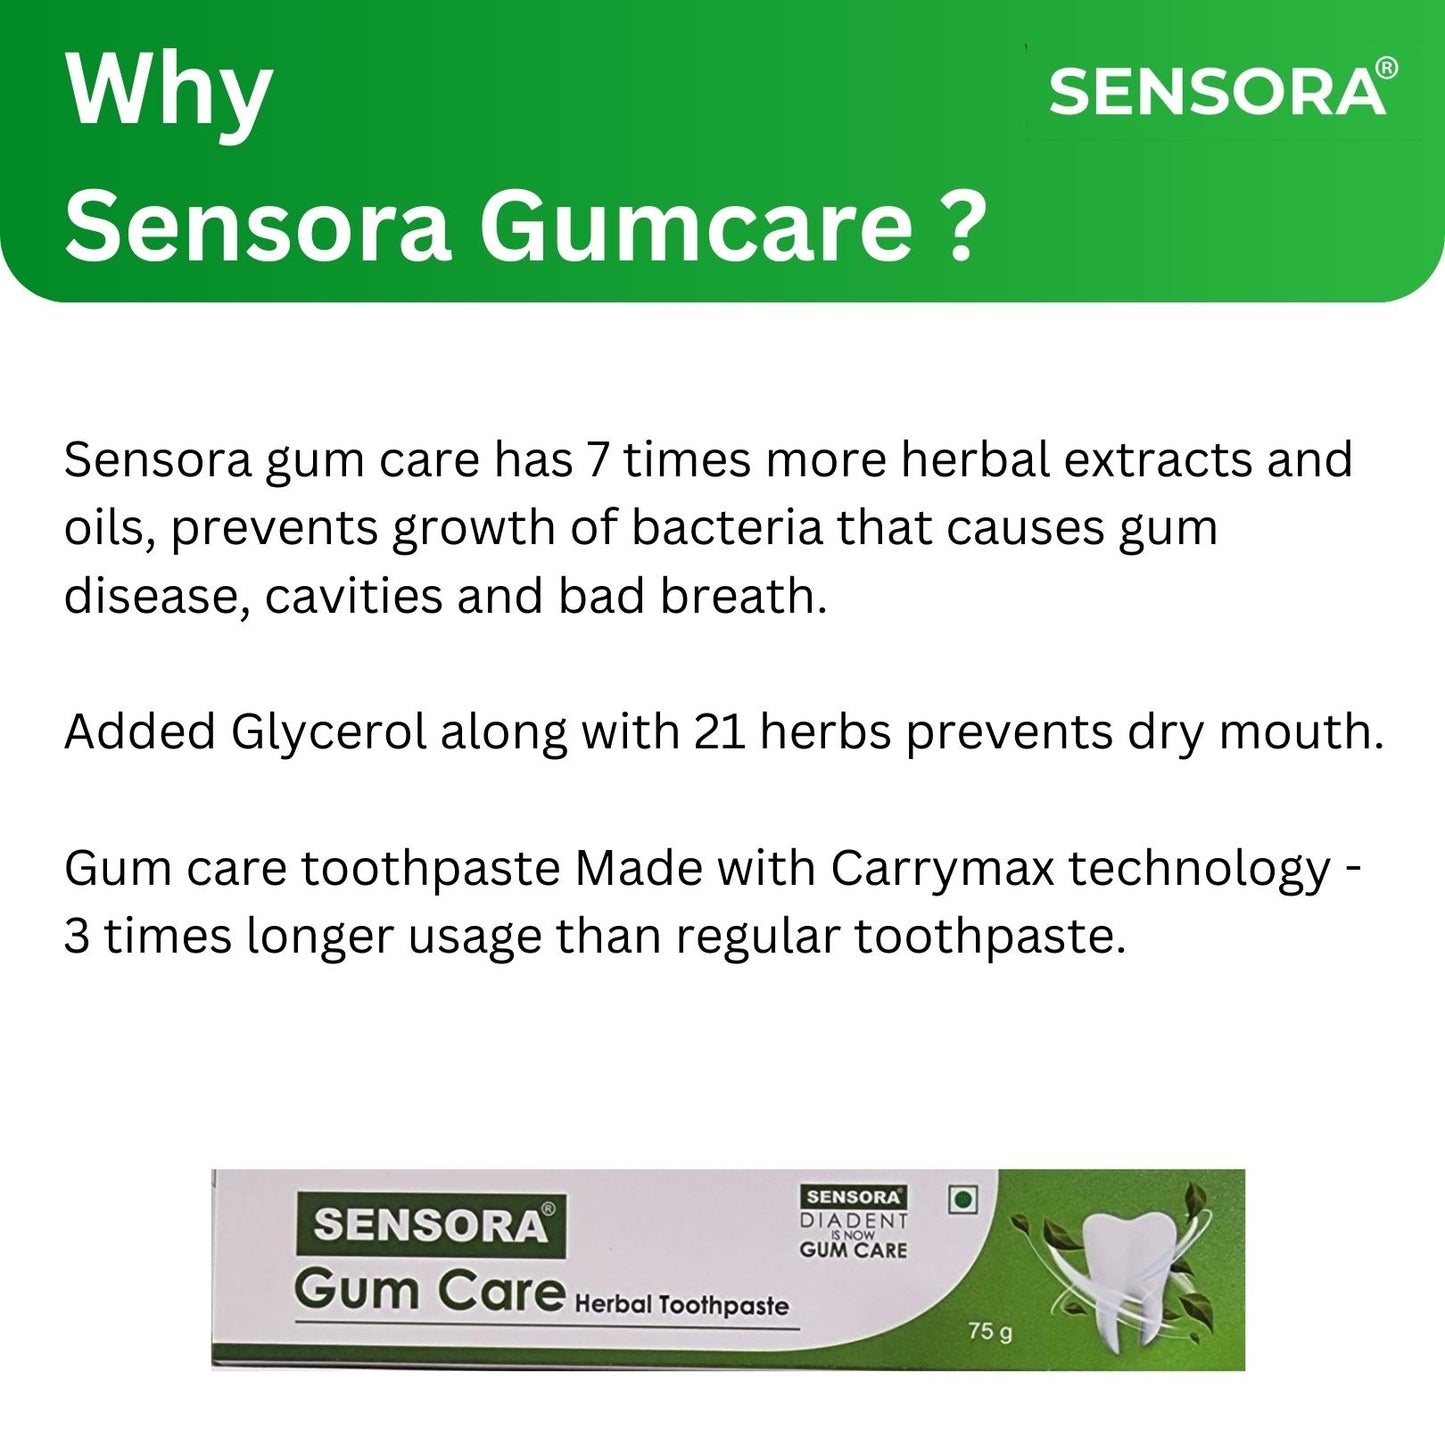 6+10 OFFER. SENSORA Gum Care Toothpaste - Pack of 6 and FREE 6 Super soft Toothbrushes and 4 tongue cleaners